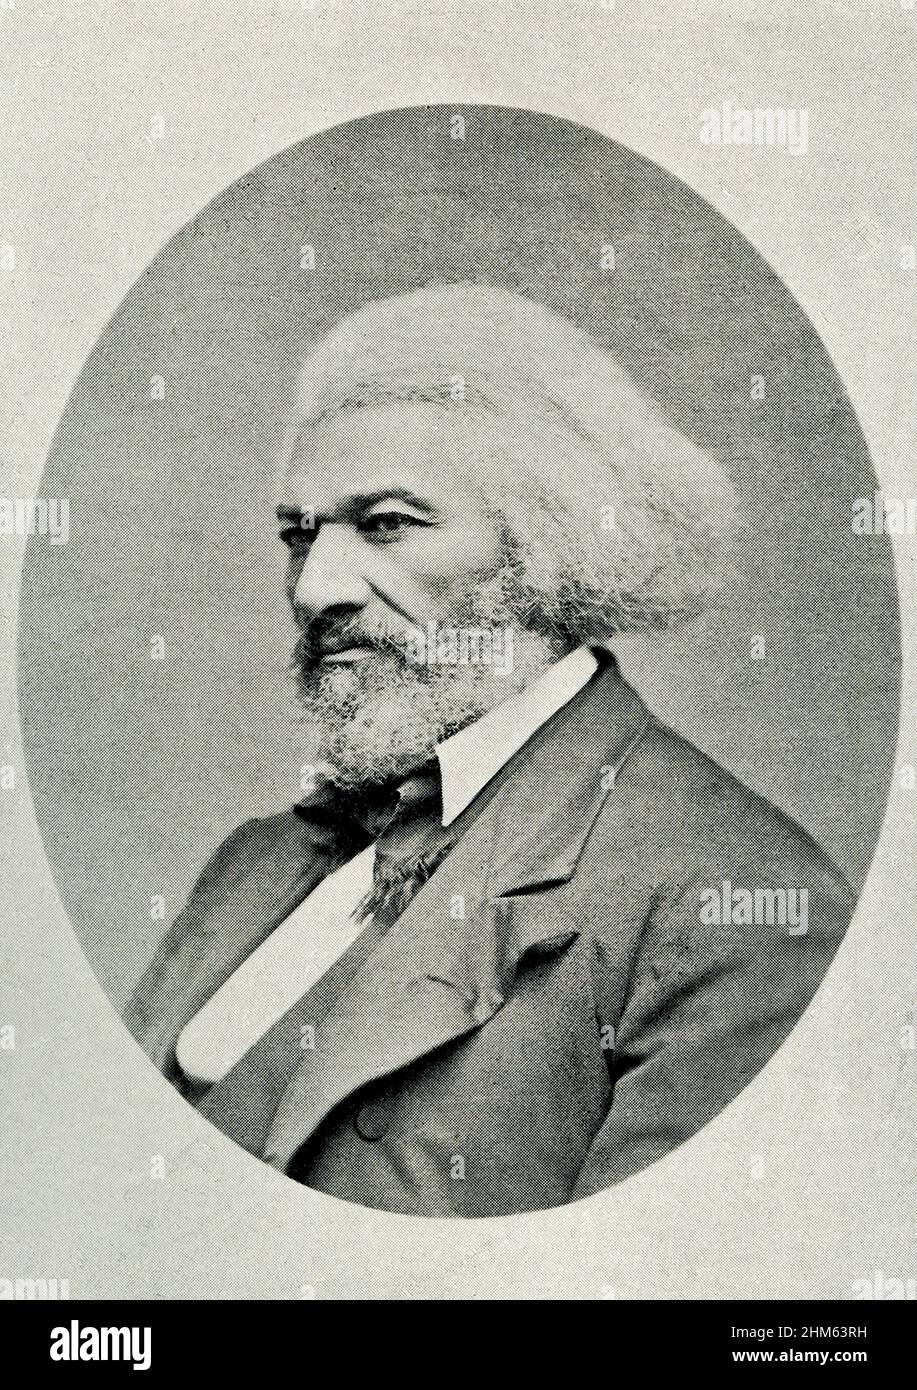 Frederick Douglass (died 1895) was an African-American social reformer, abolitionist, orator, writer, and statesman. After escaping from slavery in Maryland, he became a national leader of the abolitionist movement in Massachusetts and New York, becoming famous for his oratory and incisive antislavery writings. Stock Photo